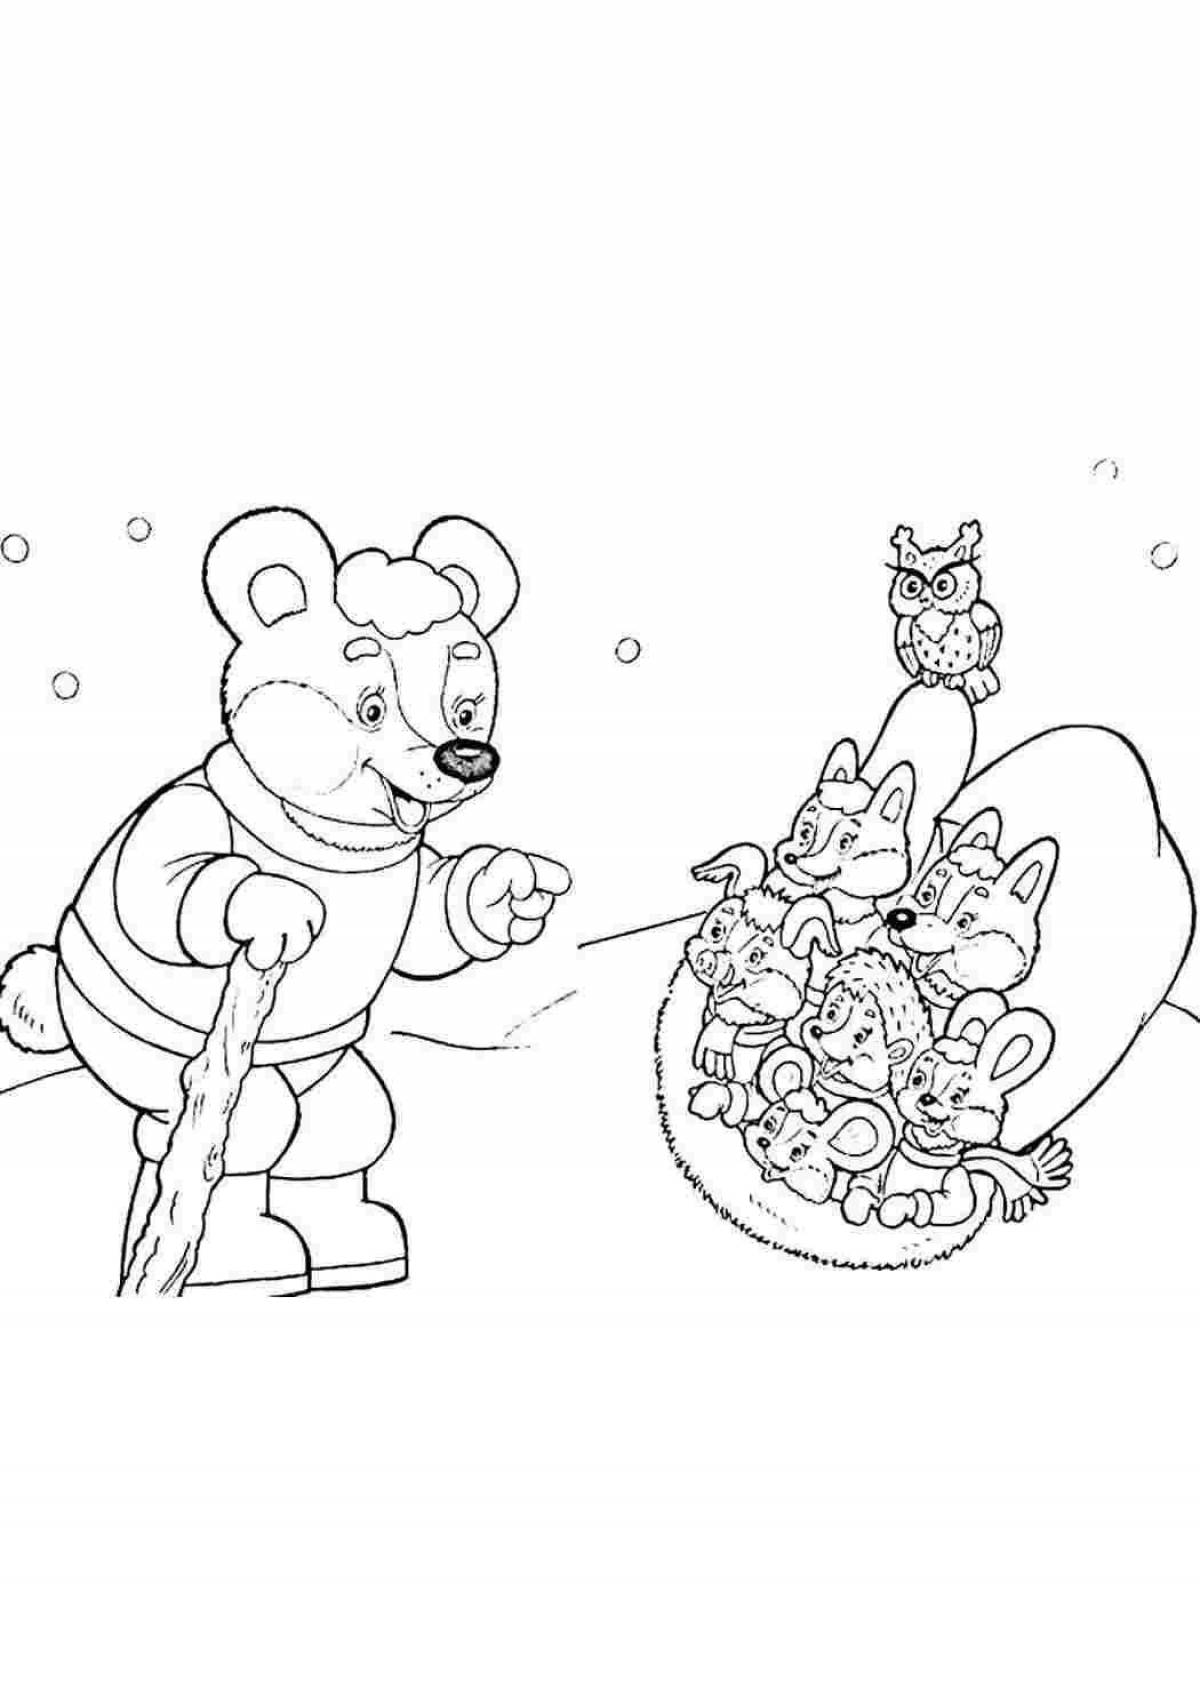 Tempting fairy tale coloring book for children